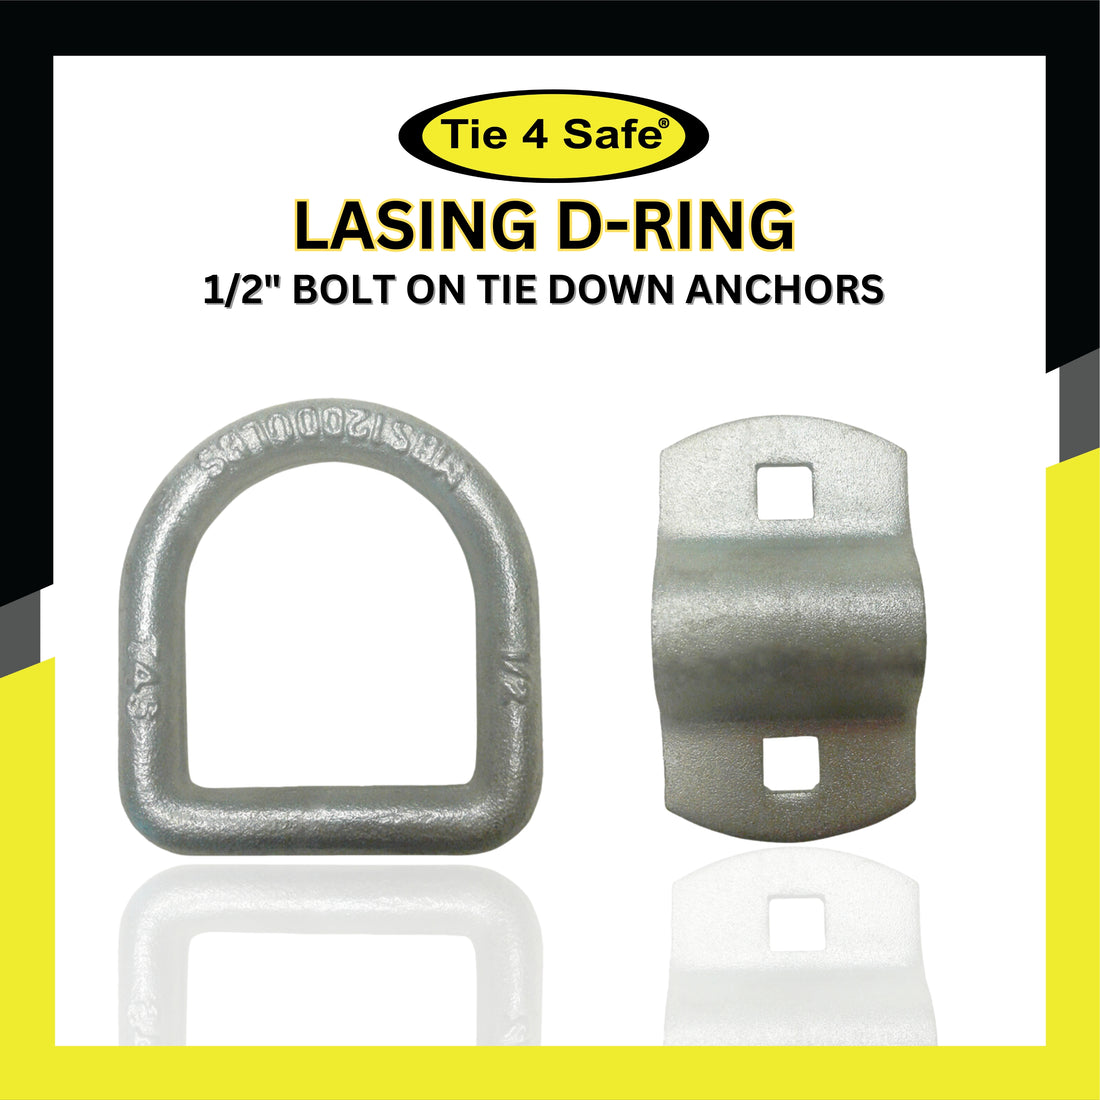 1/2" Lashing D-Ring With Cap Bolt On